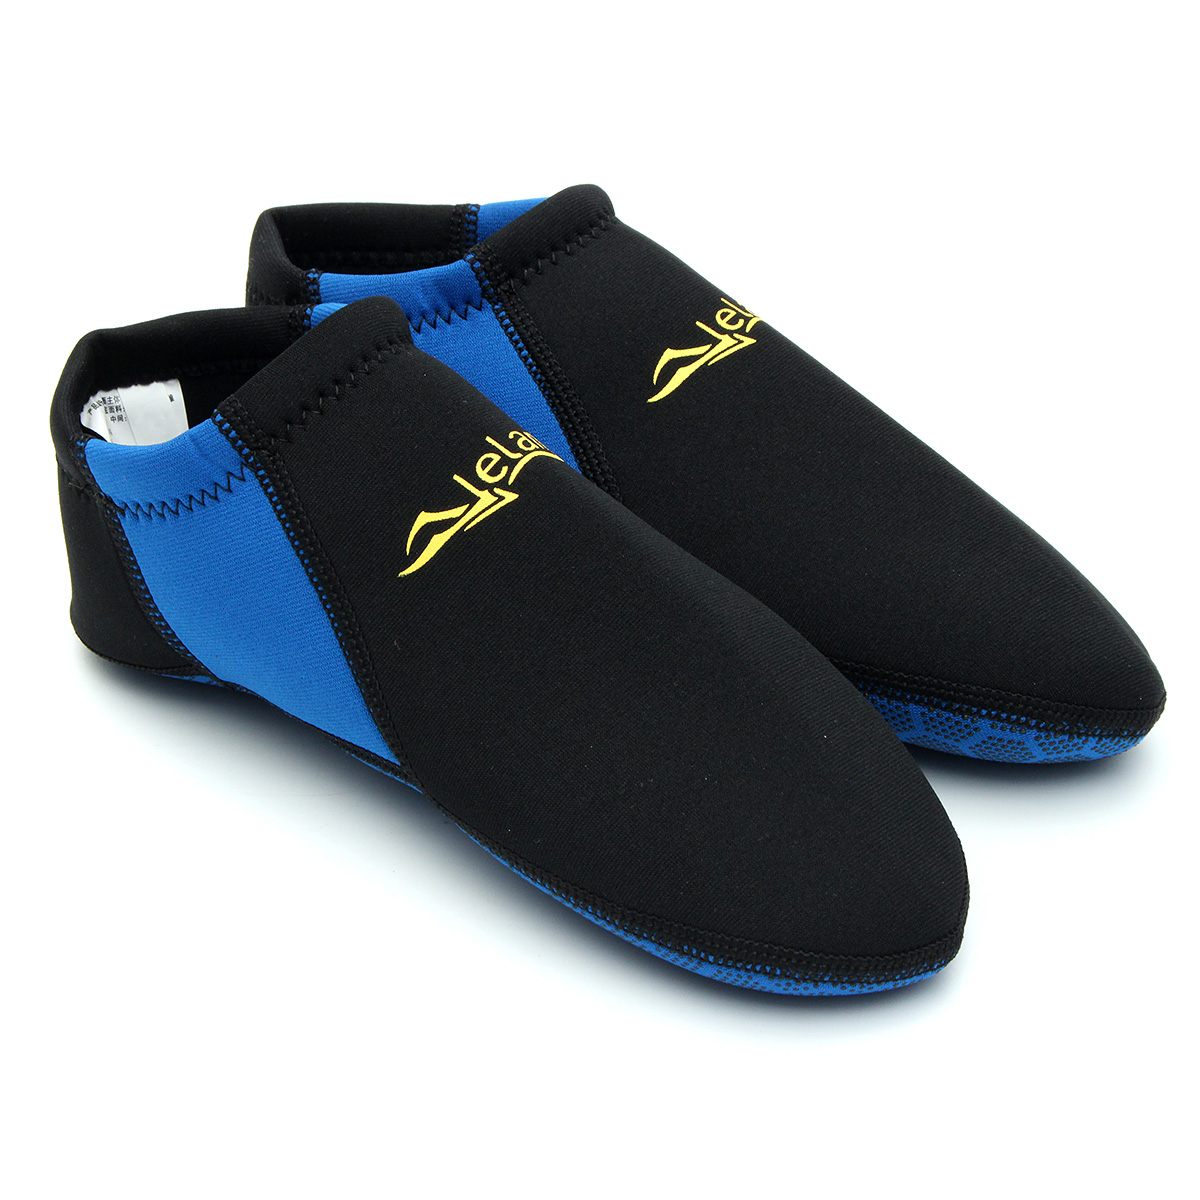 Outdoor-Swimming-Snorkel-Socks-Soft-Beach-Shoes-Water-Sport-Scuba-Surf-Diving-1130872-3